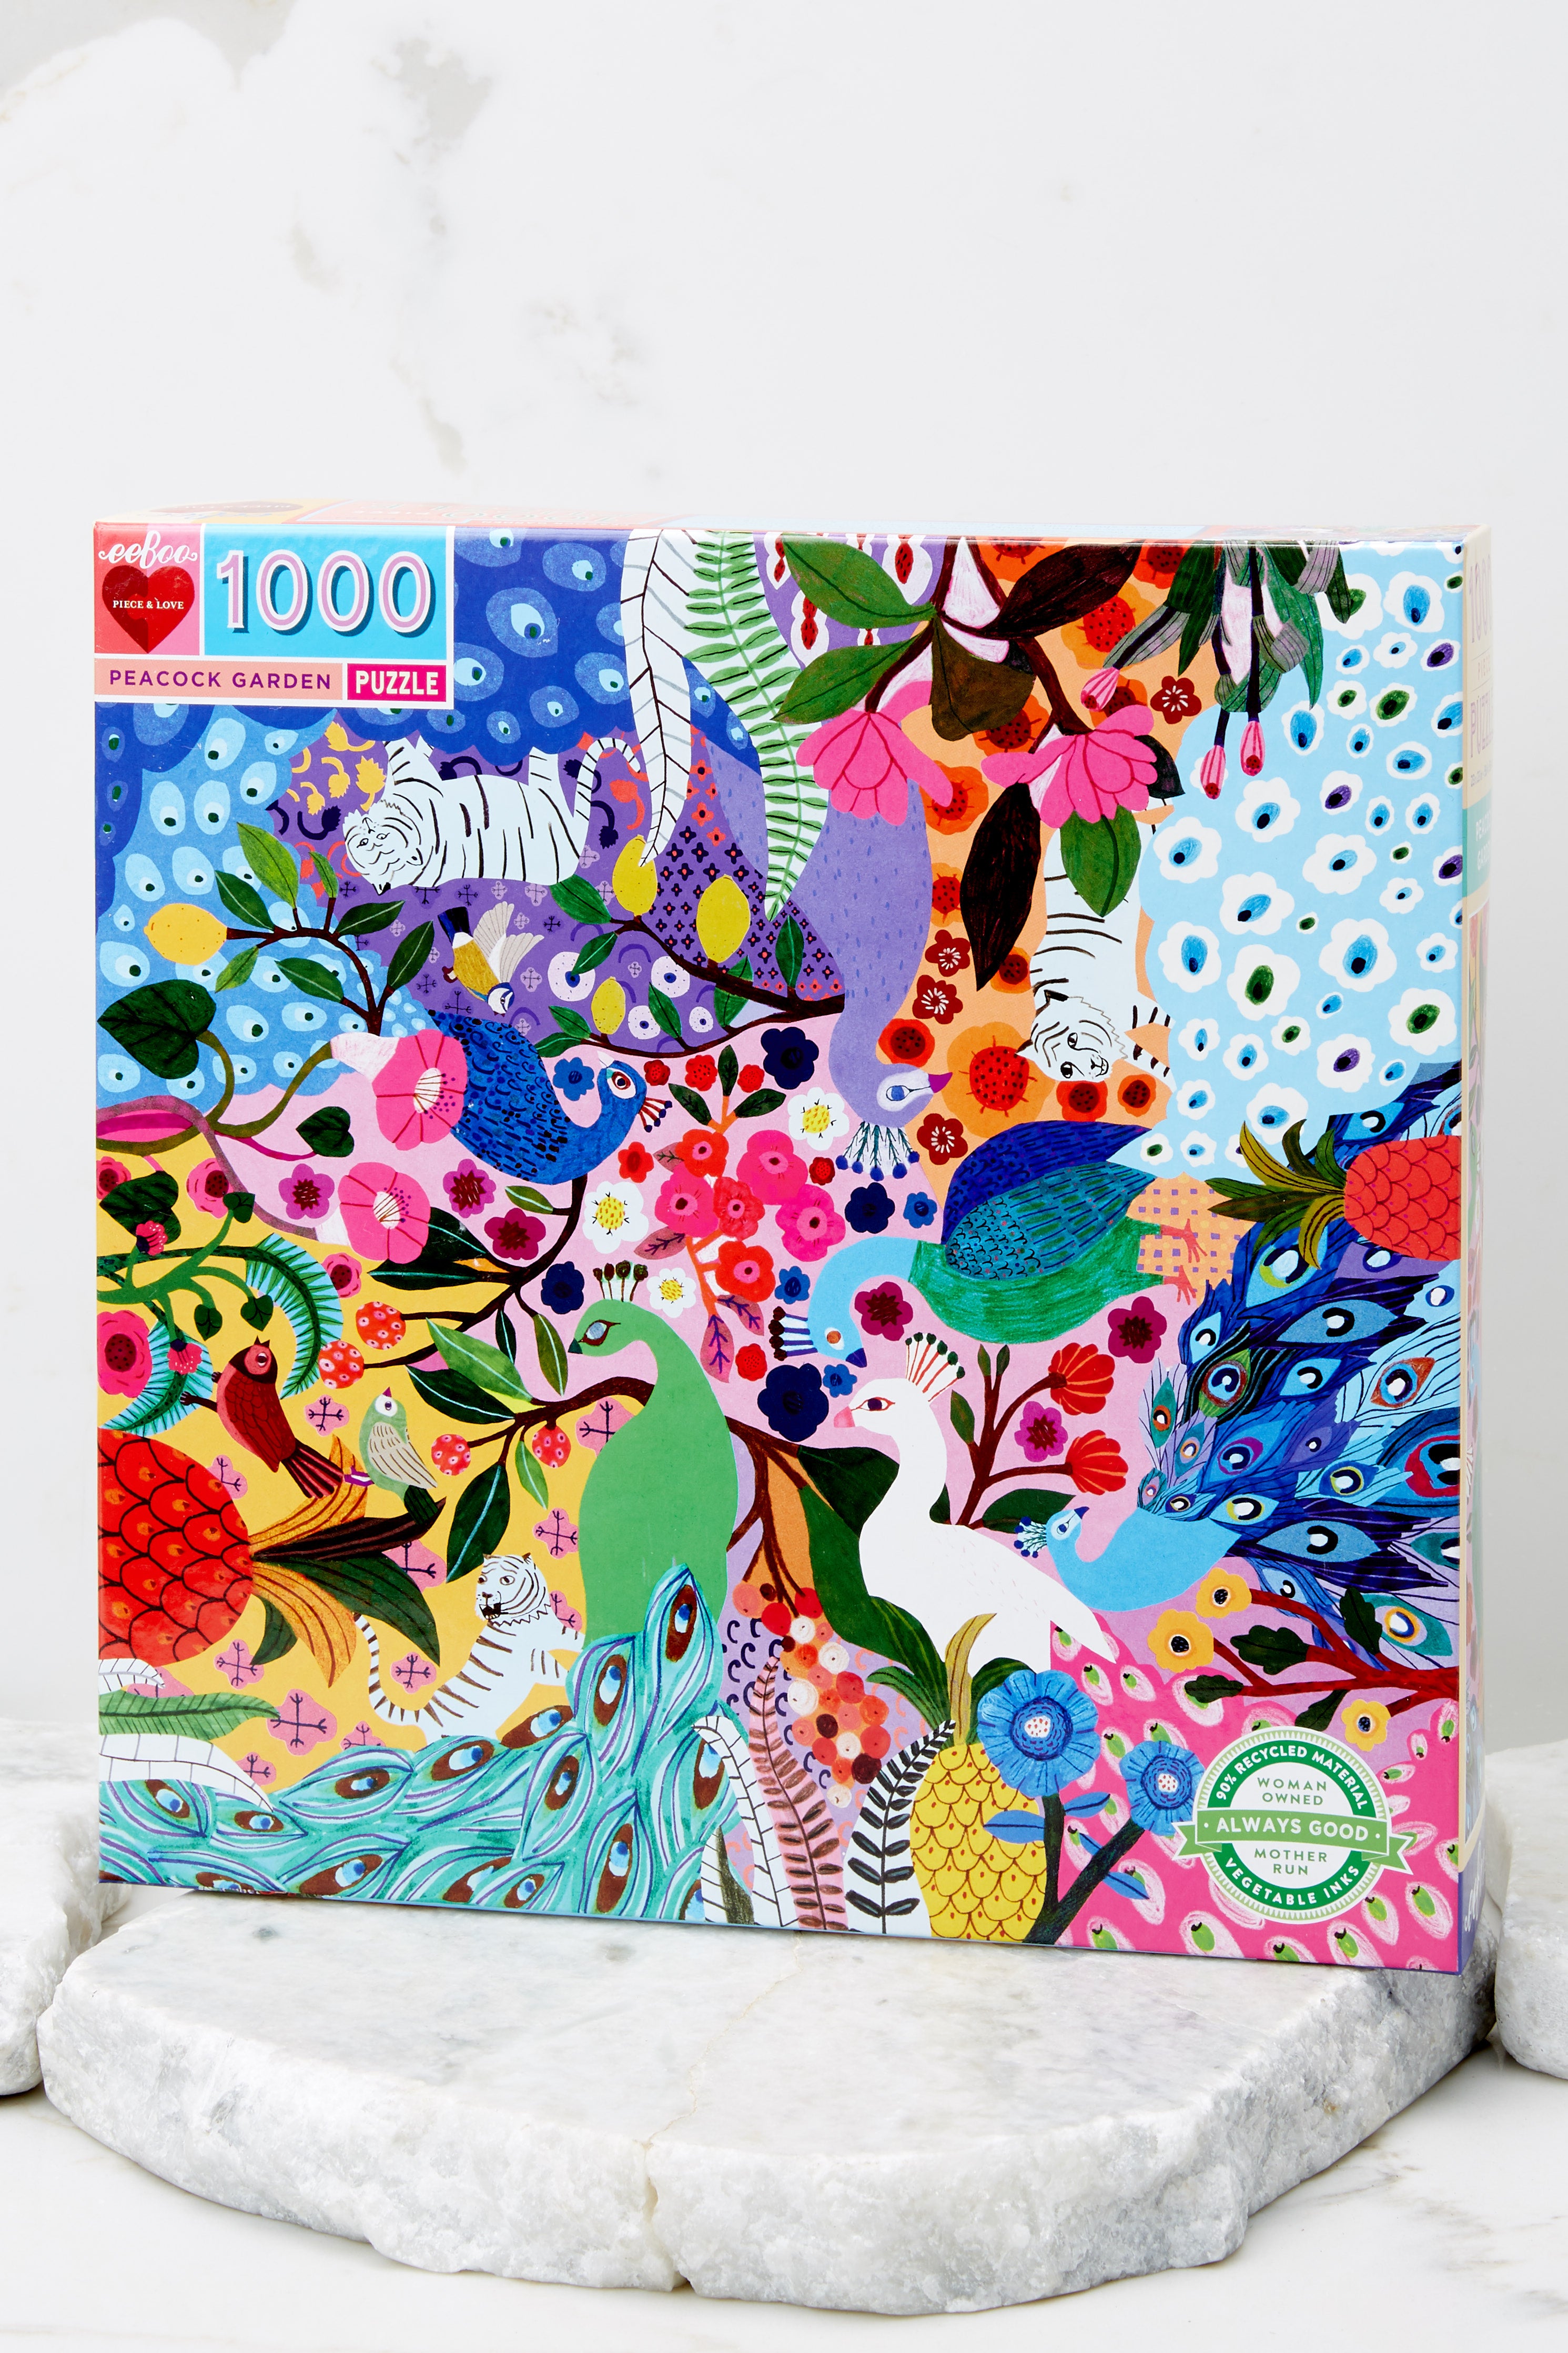 1 Peacock Garden Puzzle at Red Dress